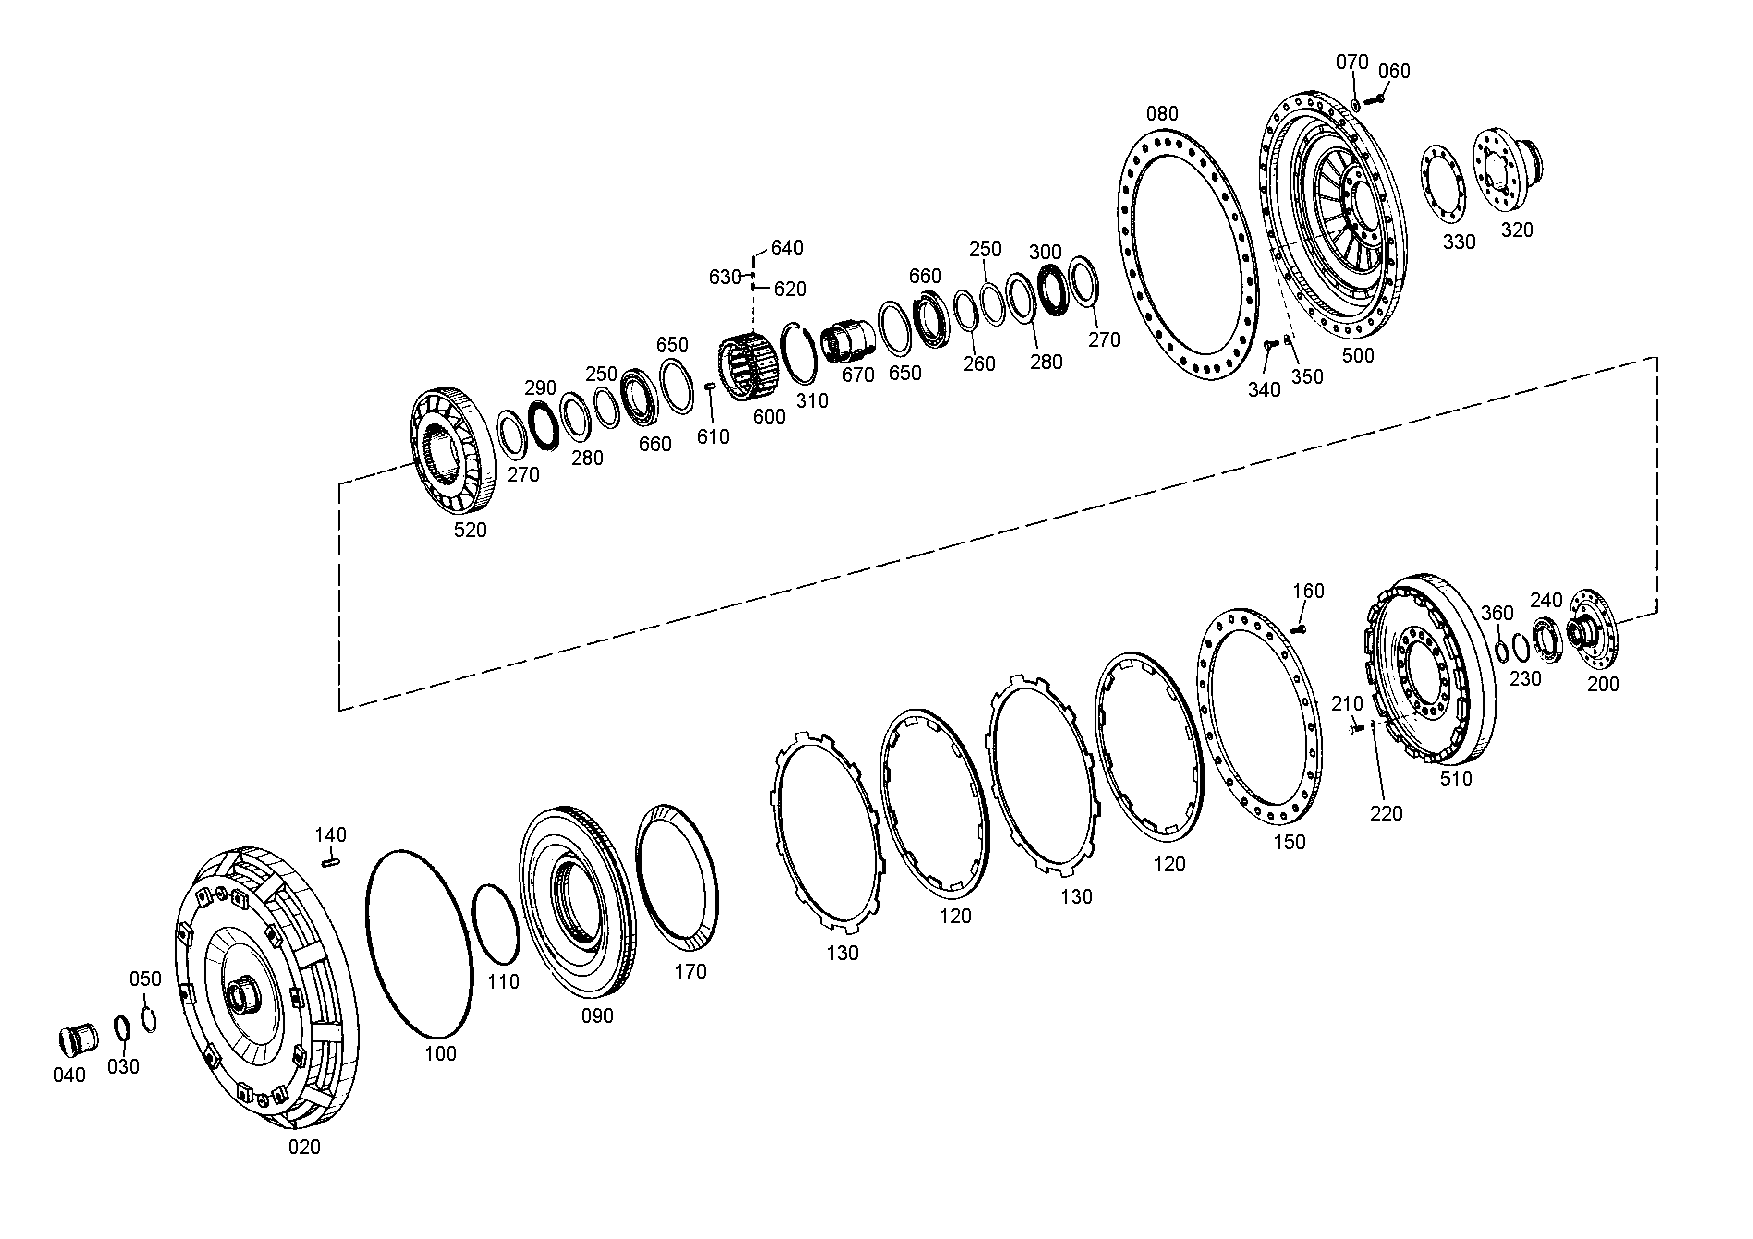 drawing for BEISSBARTH & MUELLER GMBH & CO. 09398169 - CYL.ROLLER (figure 3)